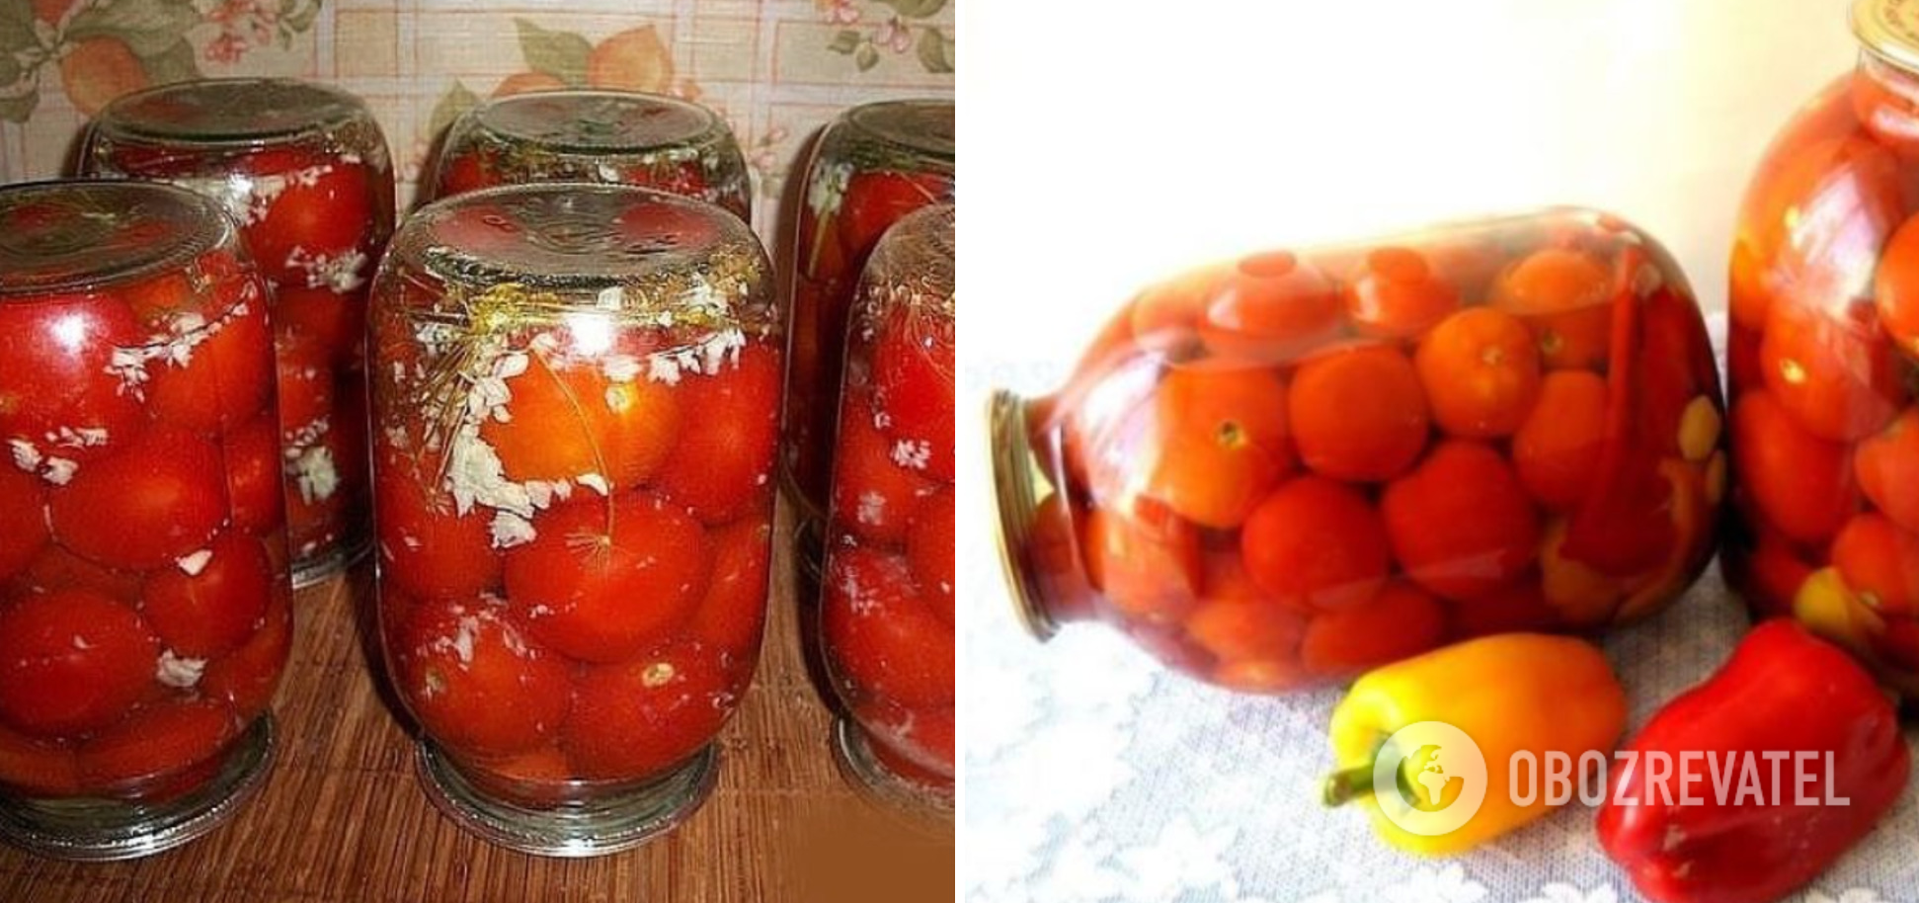 Why a jar of tomatoes explodes